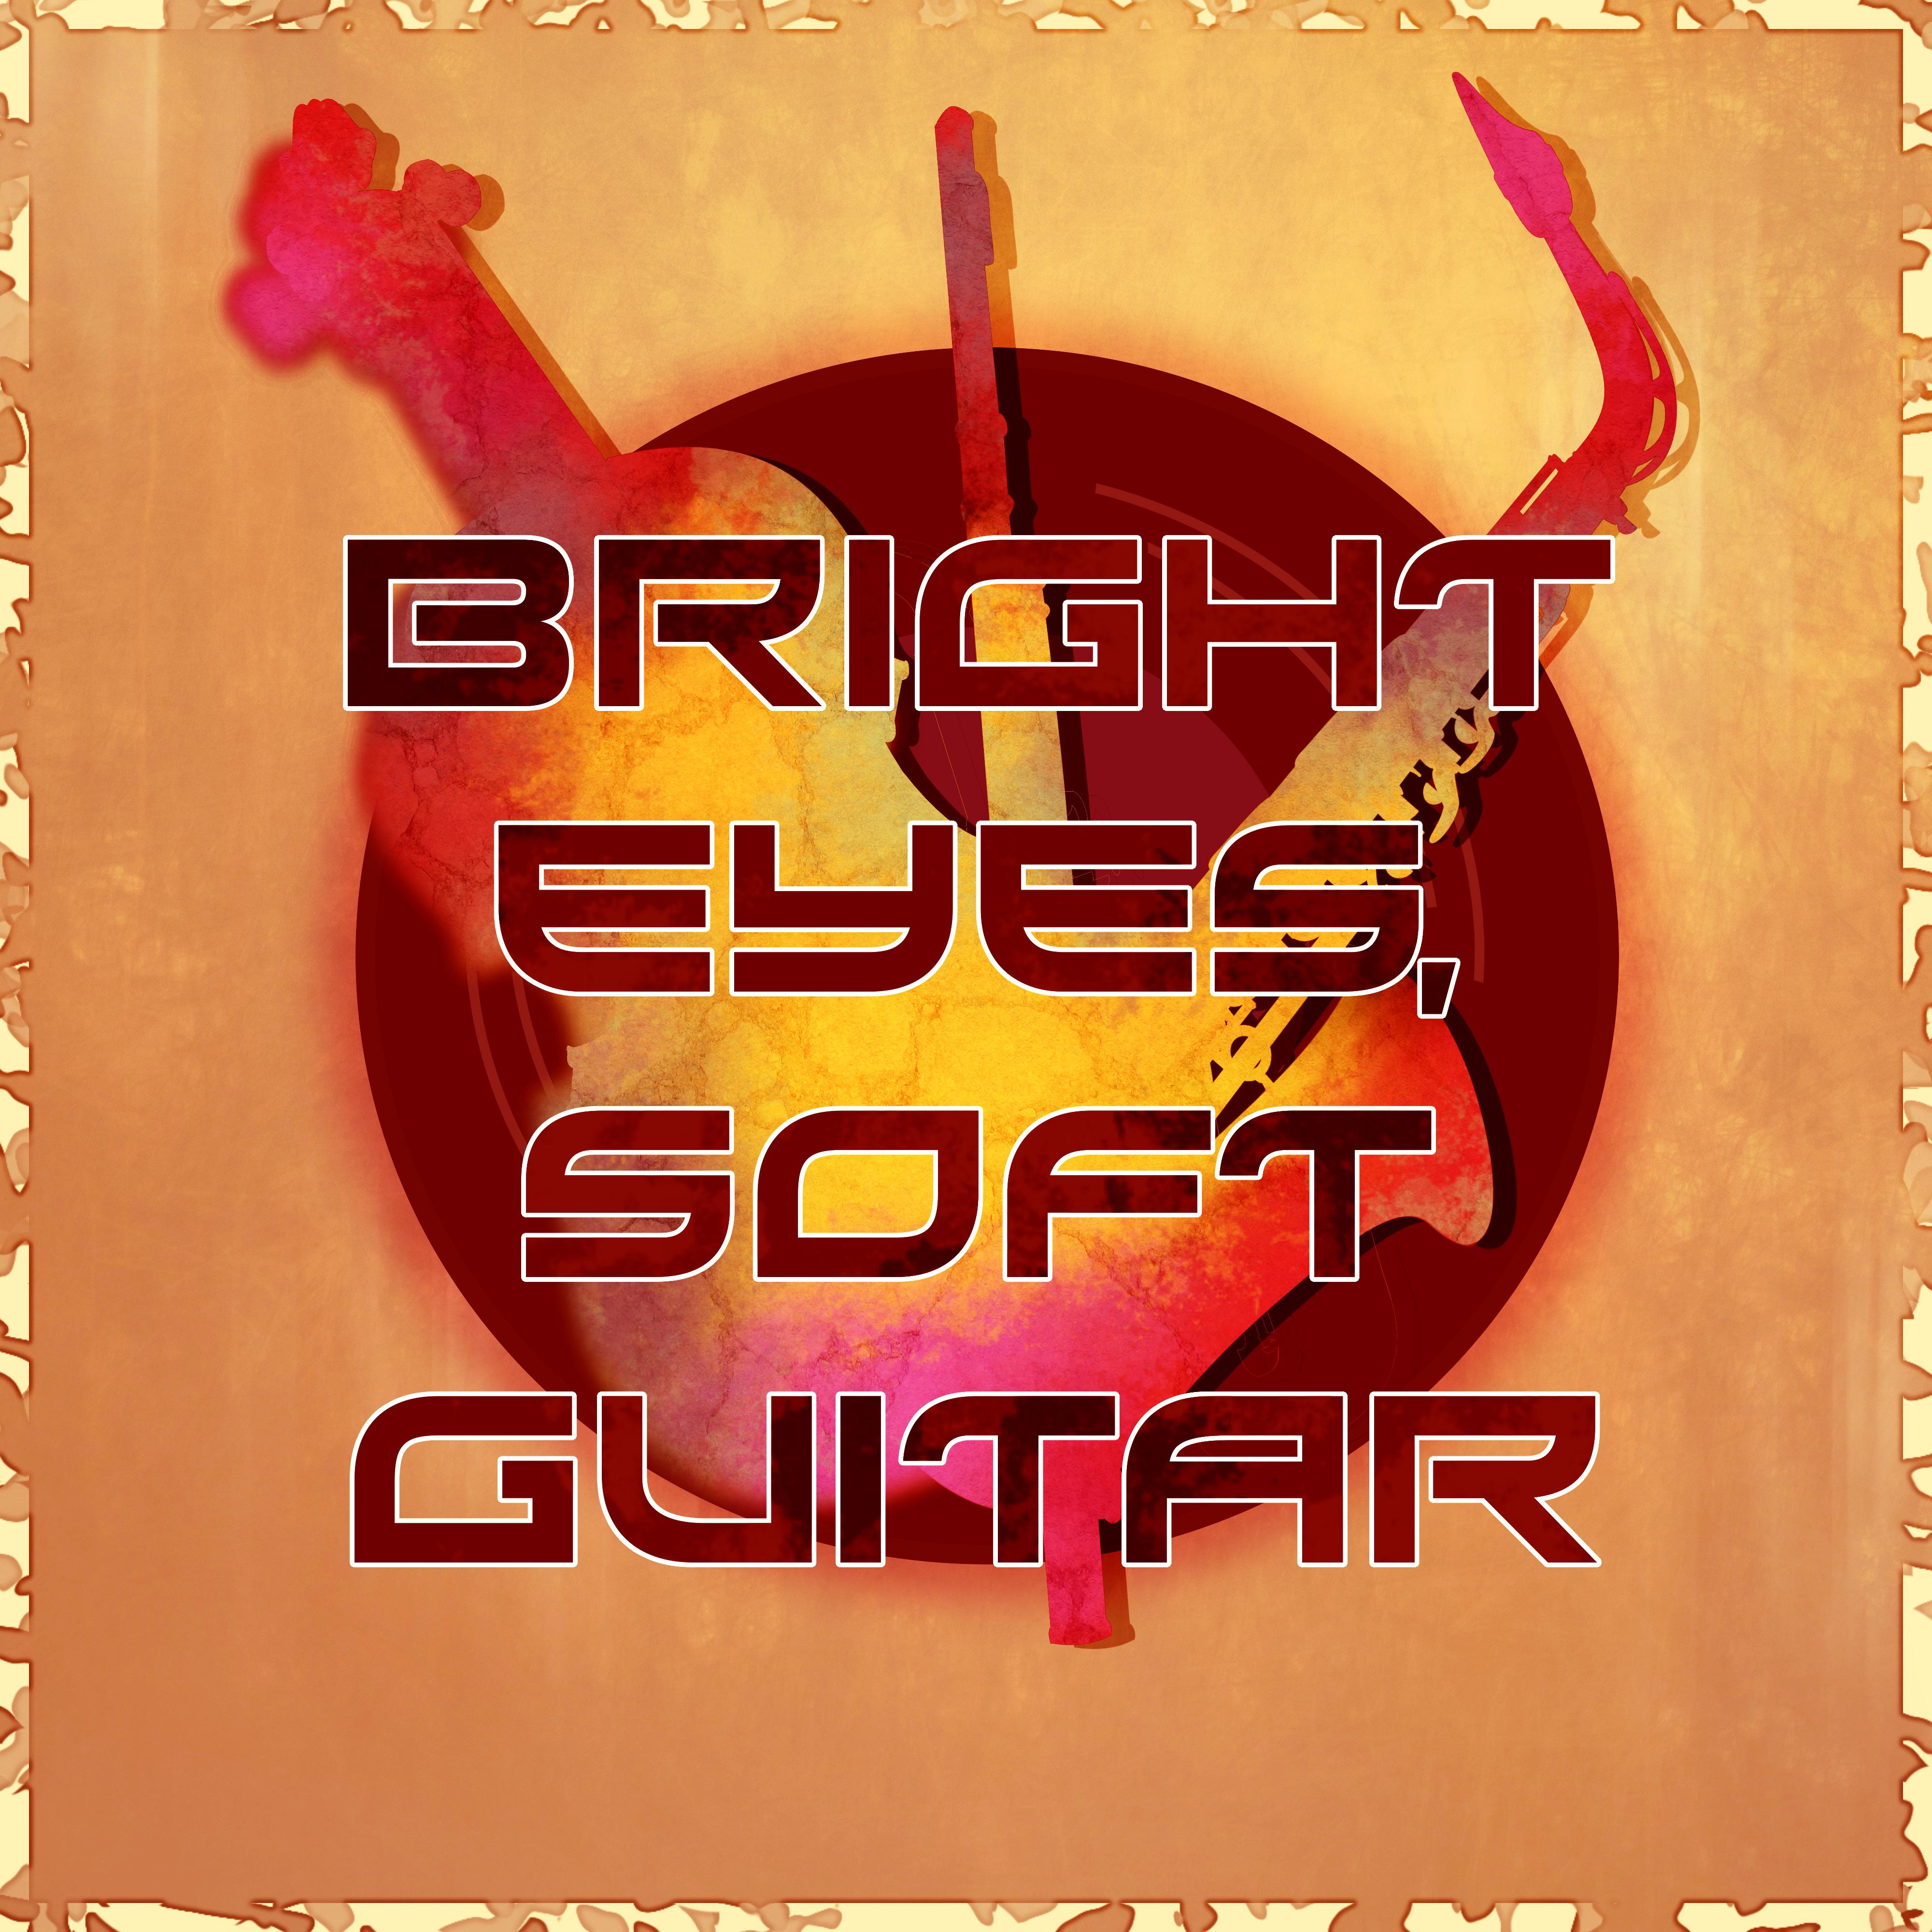 Bright Eyes, Soft Guitar - Jazz Club and Wellbeing, Beach Break Cafe, Jazz Guitar for Chill Zone